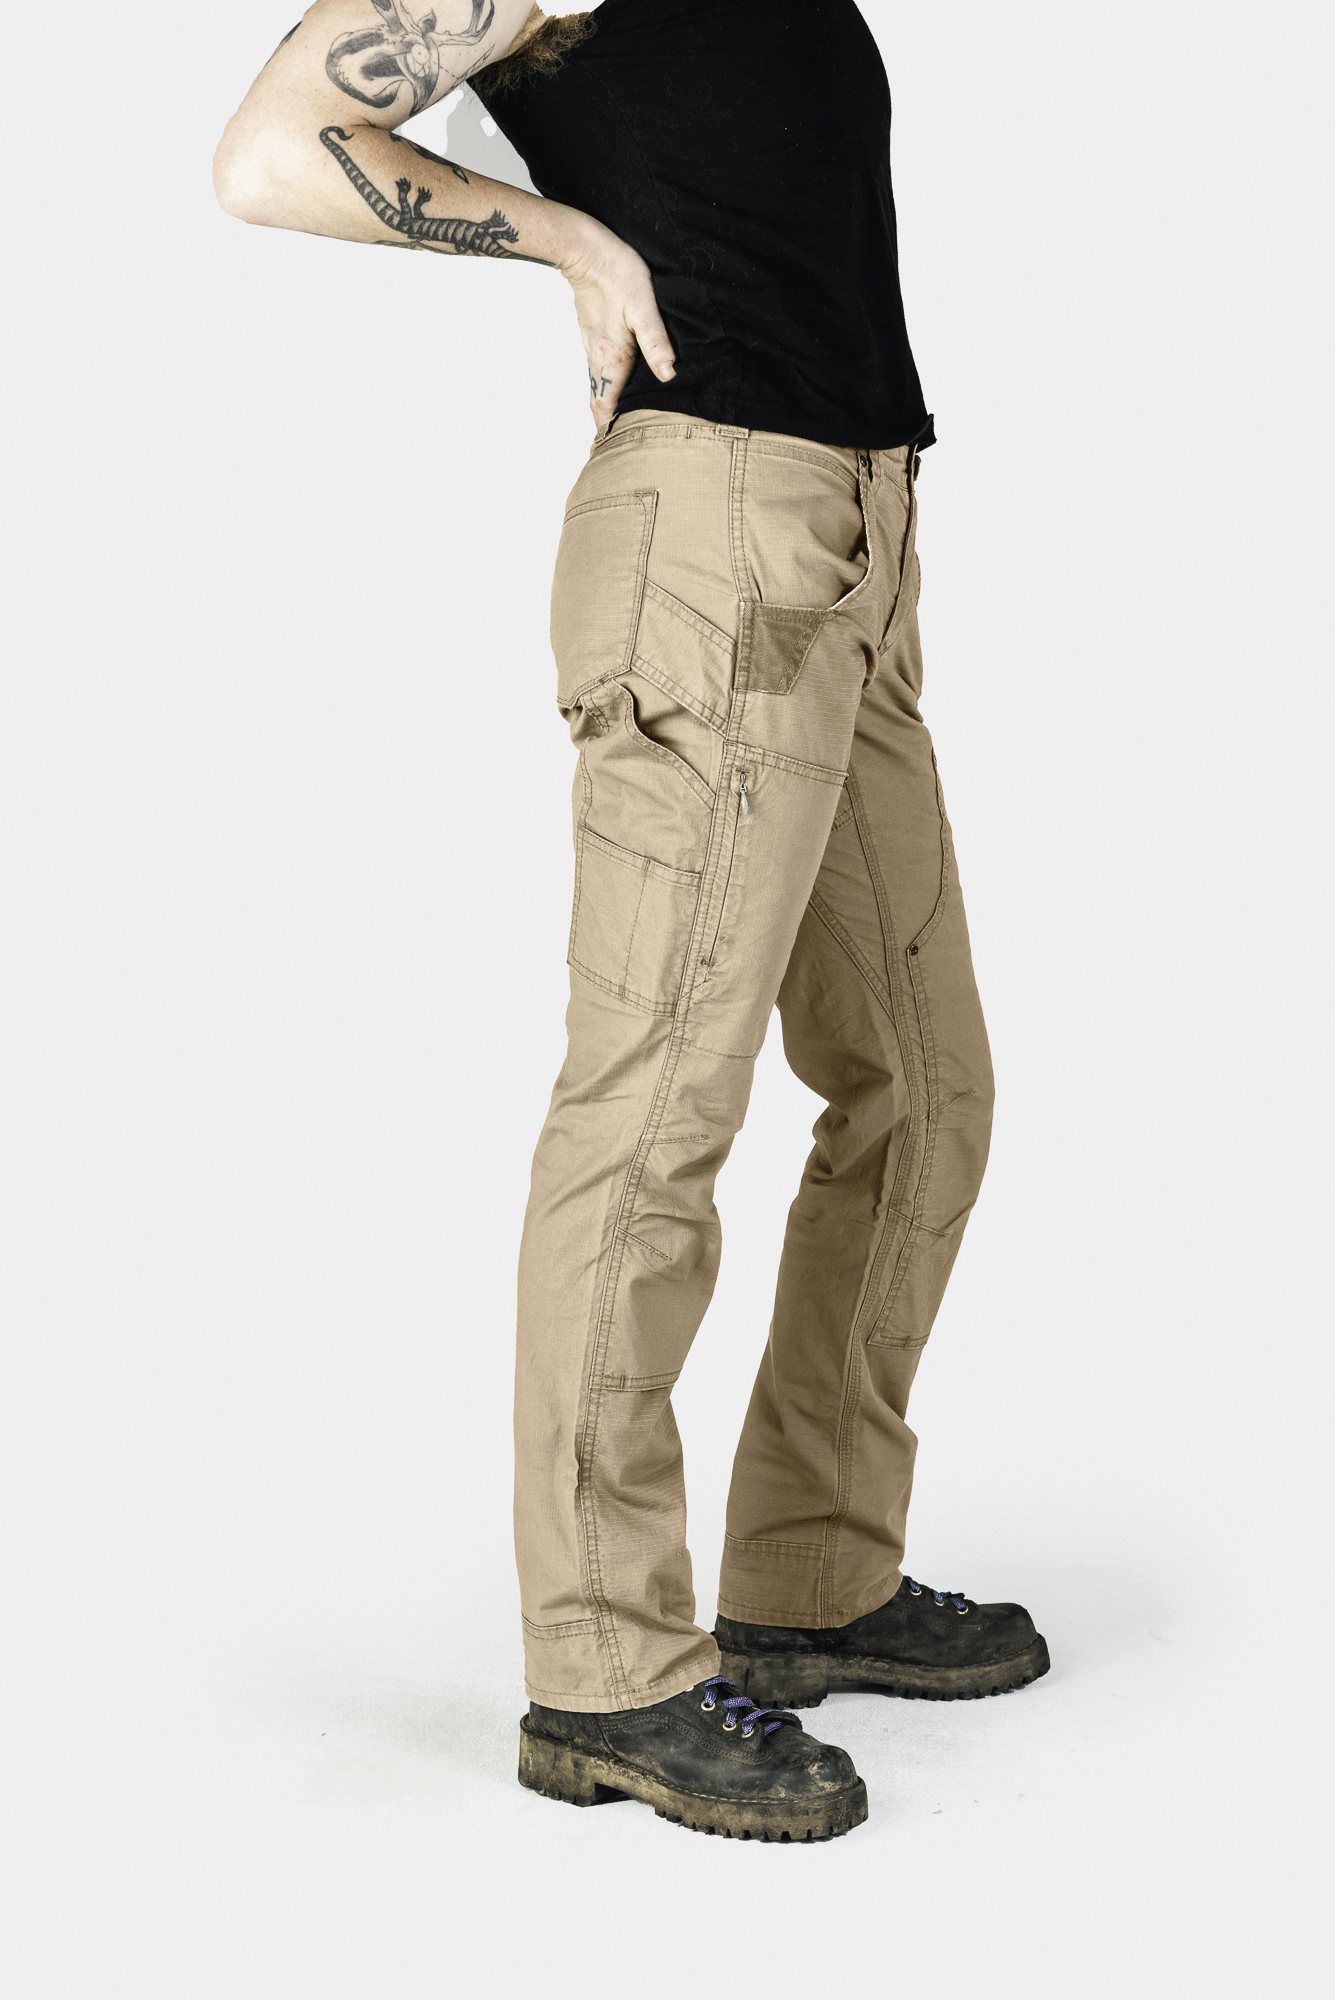 Hawx Men's Brown Stretch Ripstop Utility Work Pants - Big - Country  Outfitter